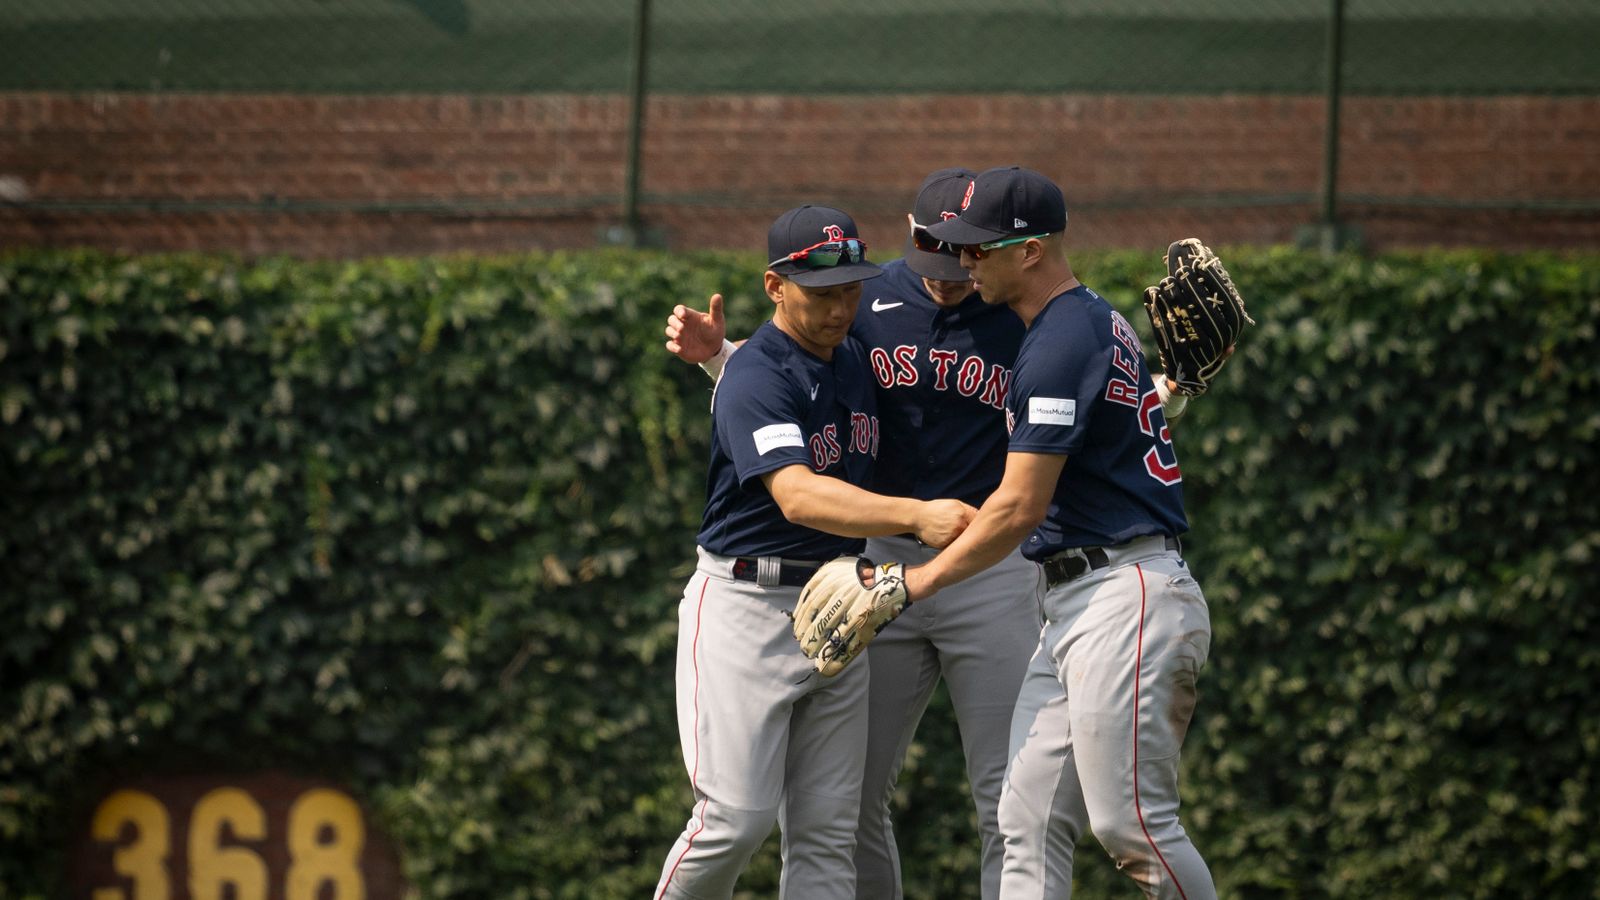 BSJ Game Report: Red Sox 11, Cubs 5 - Yoshida supports strong